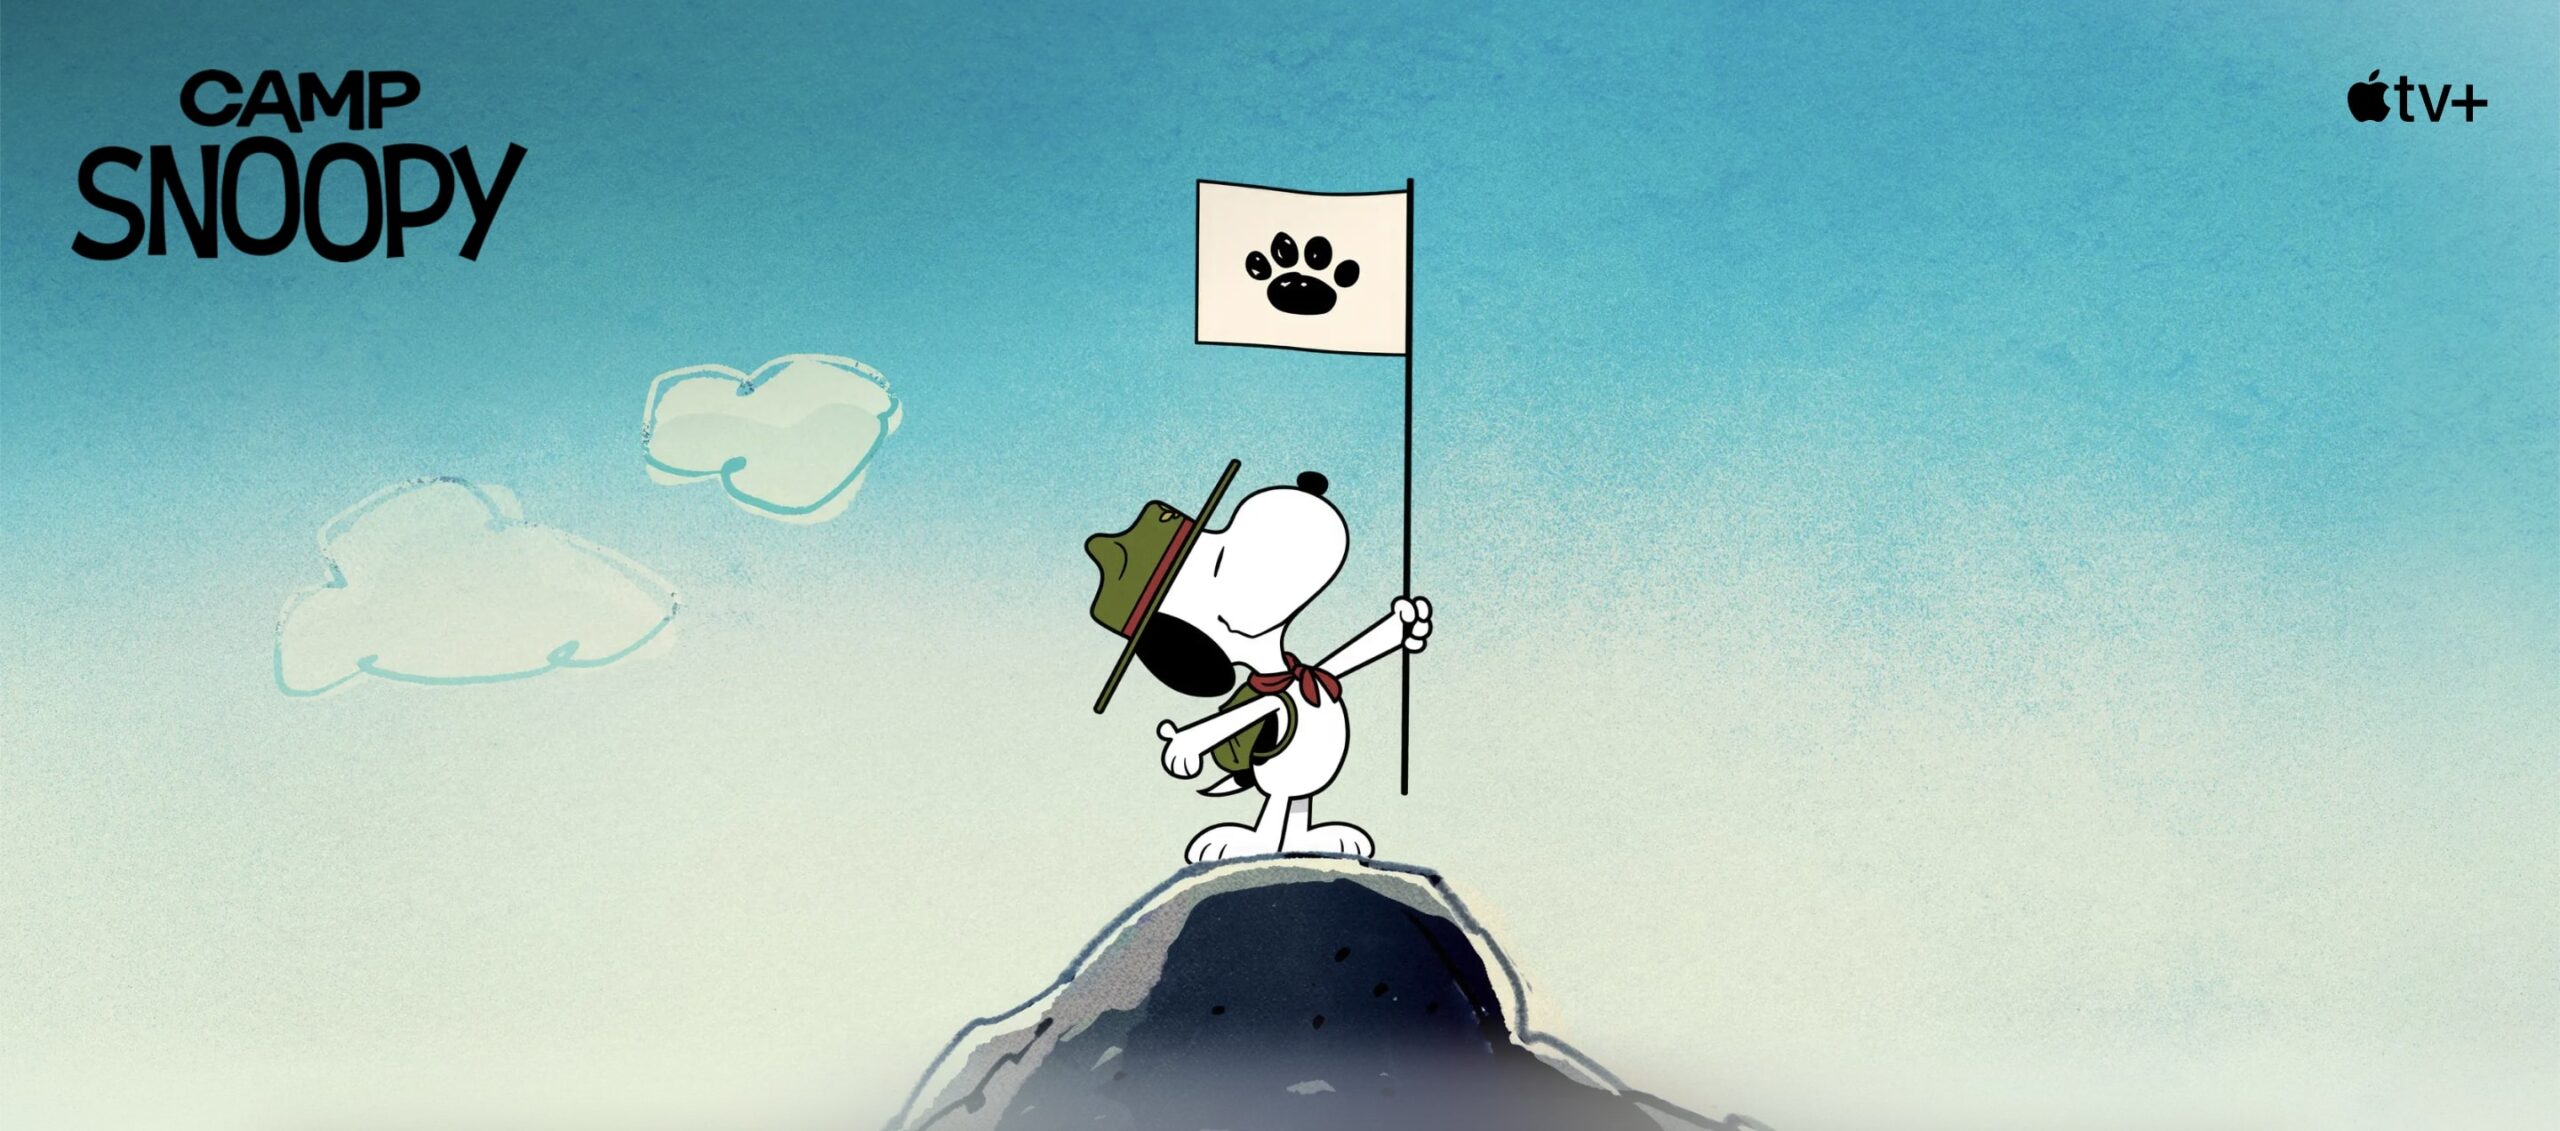 Camp snoopy upcoming apple tv show